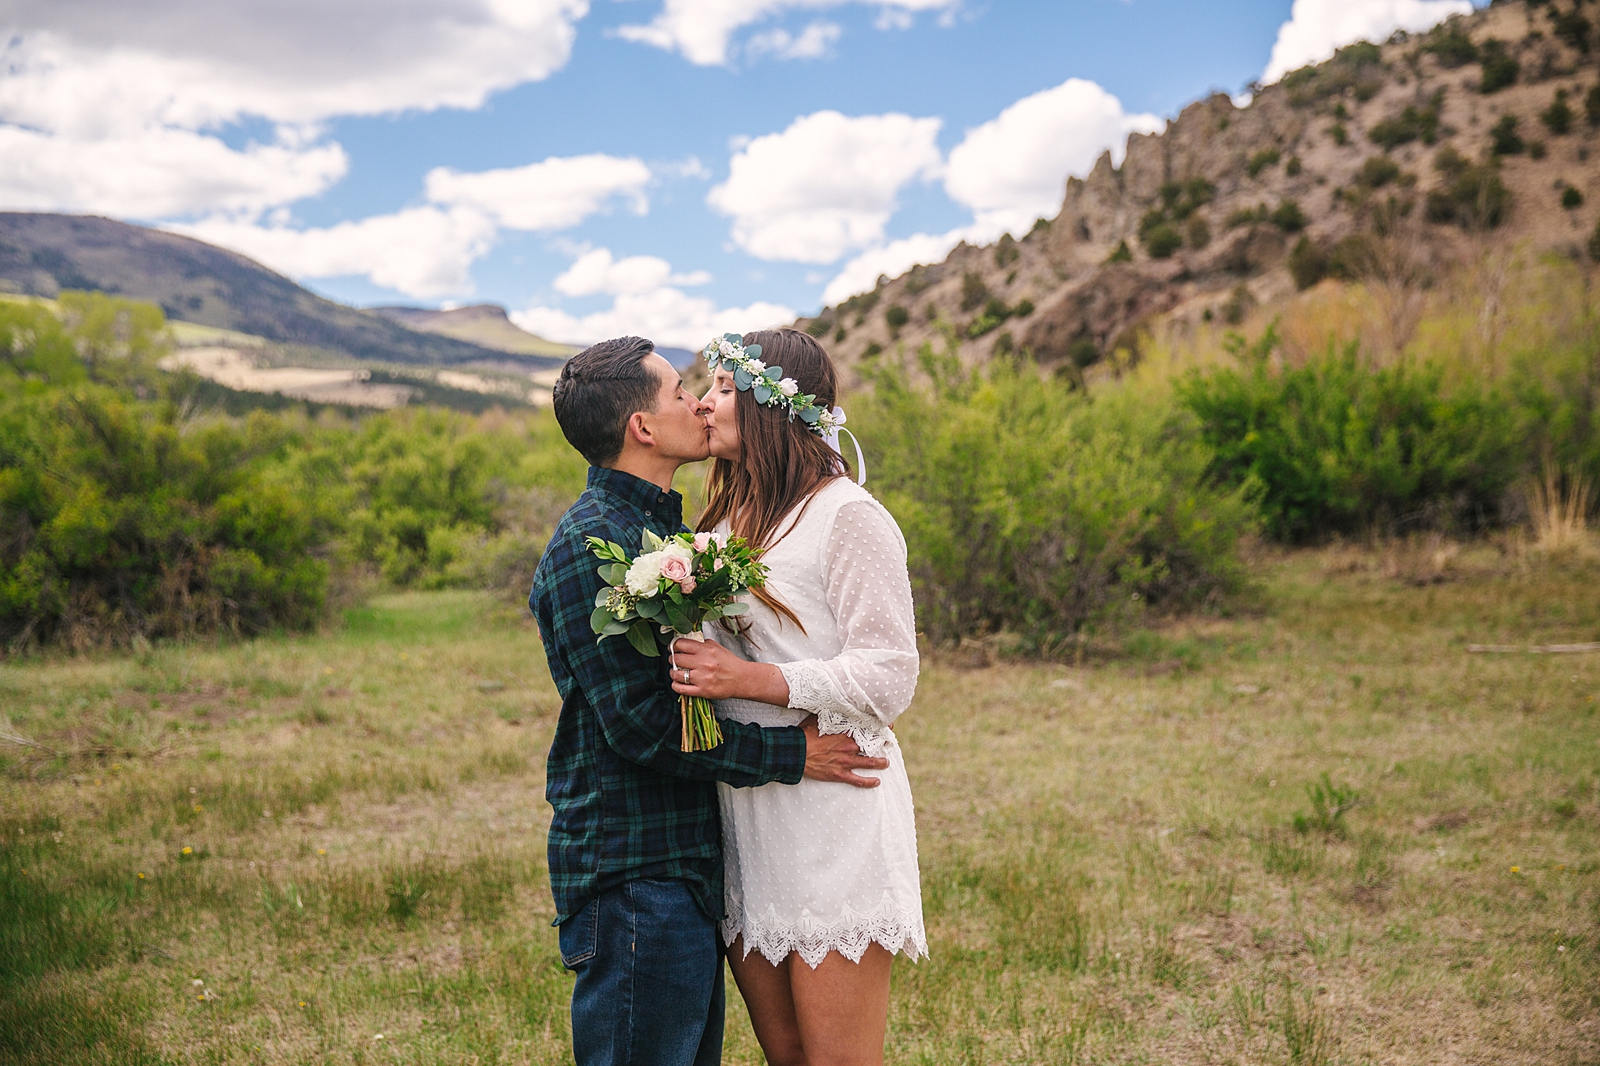 Intimate elopement in the mountains of northern New Mexico near Taos